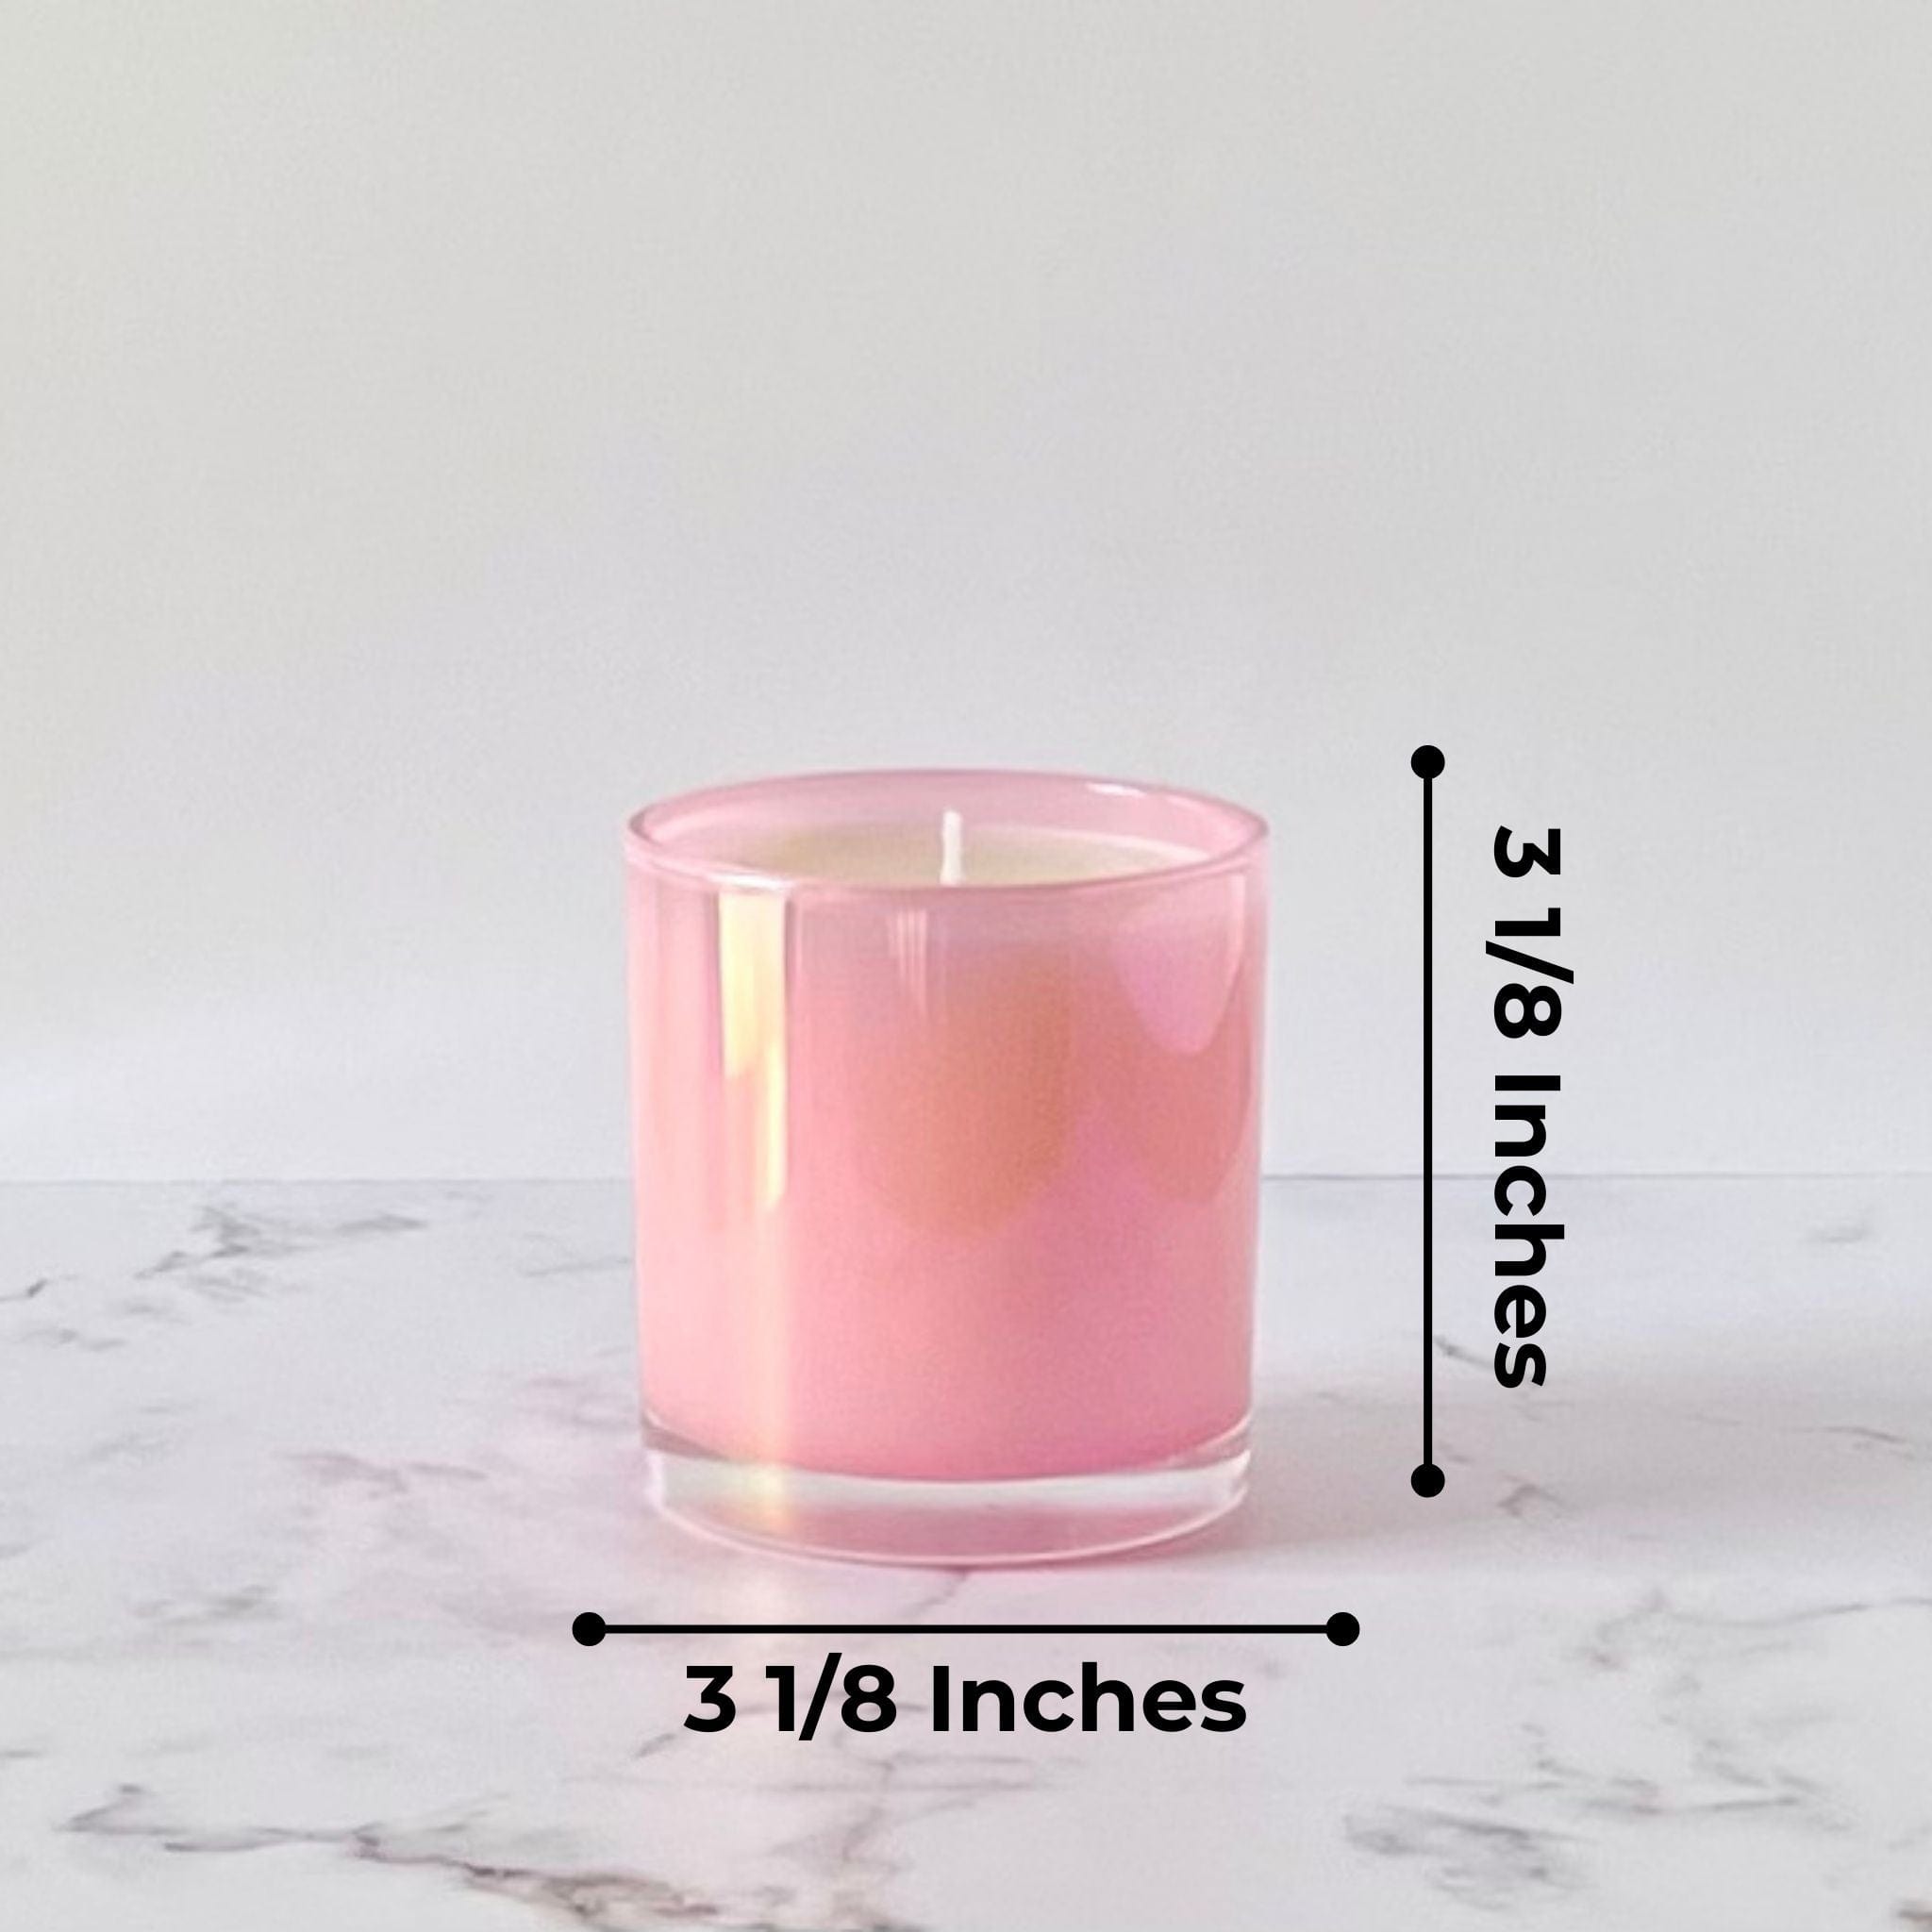 Private Label Candles by Velavida Candles 9 Oz Pink Iridescent Candle (12 Candles)